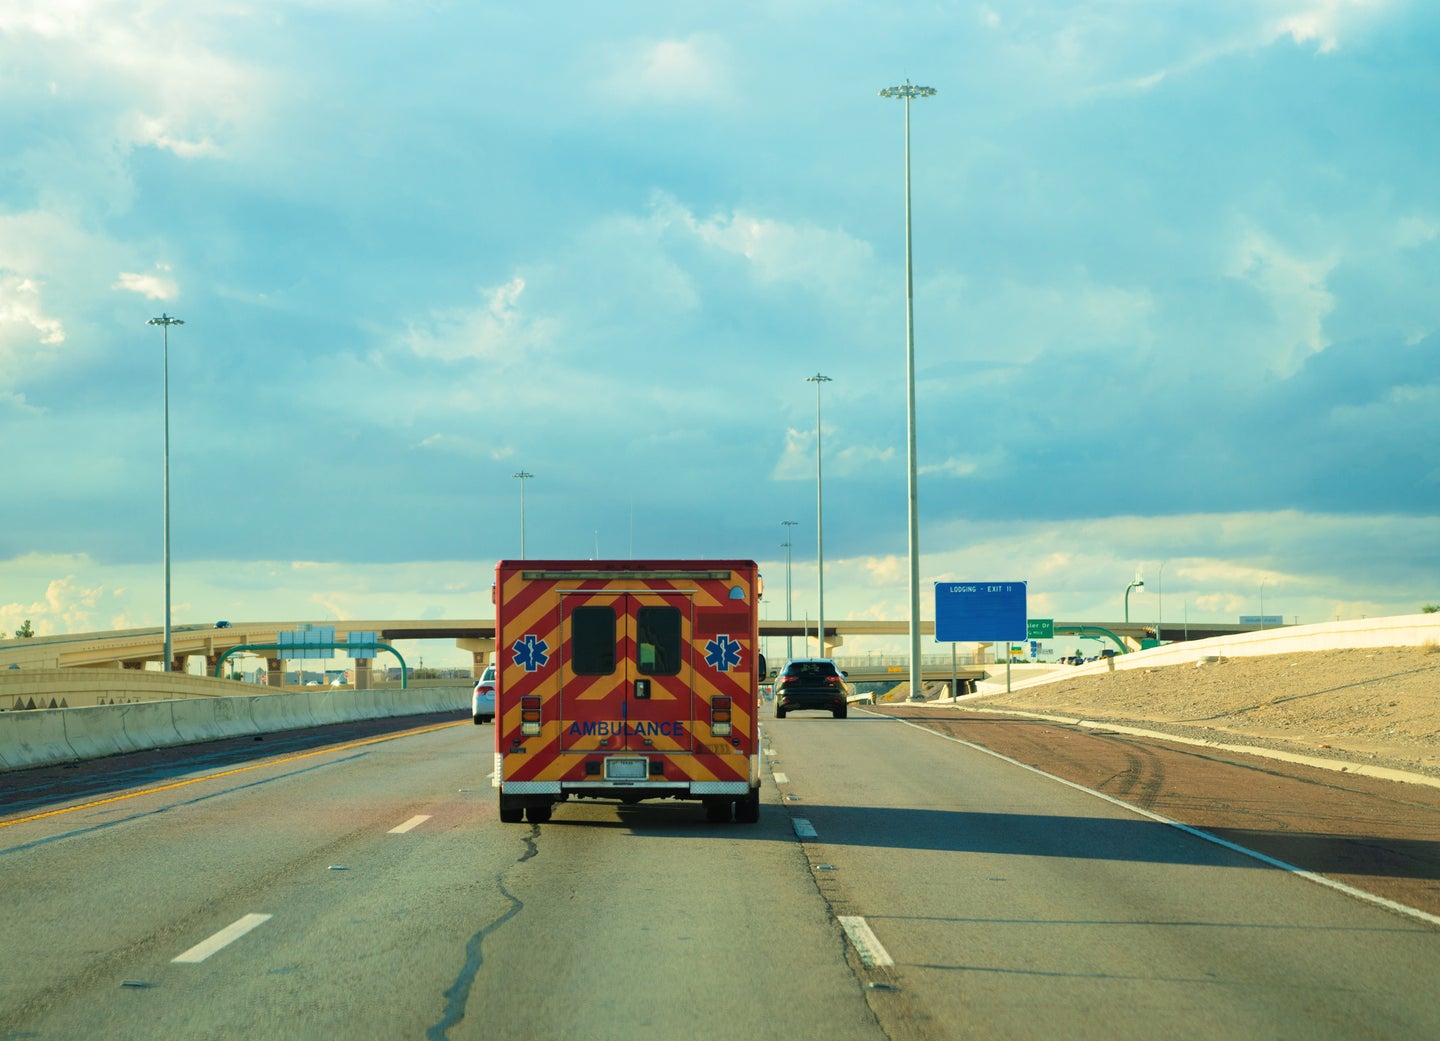 Ambulance driving on the highway in Texas. THEPALMER/Getty Images